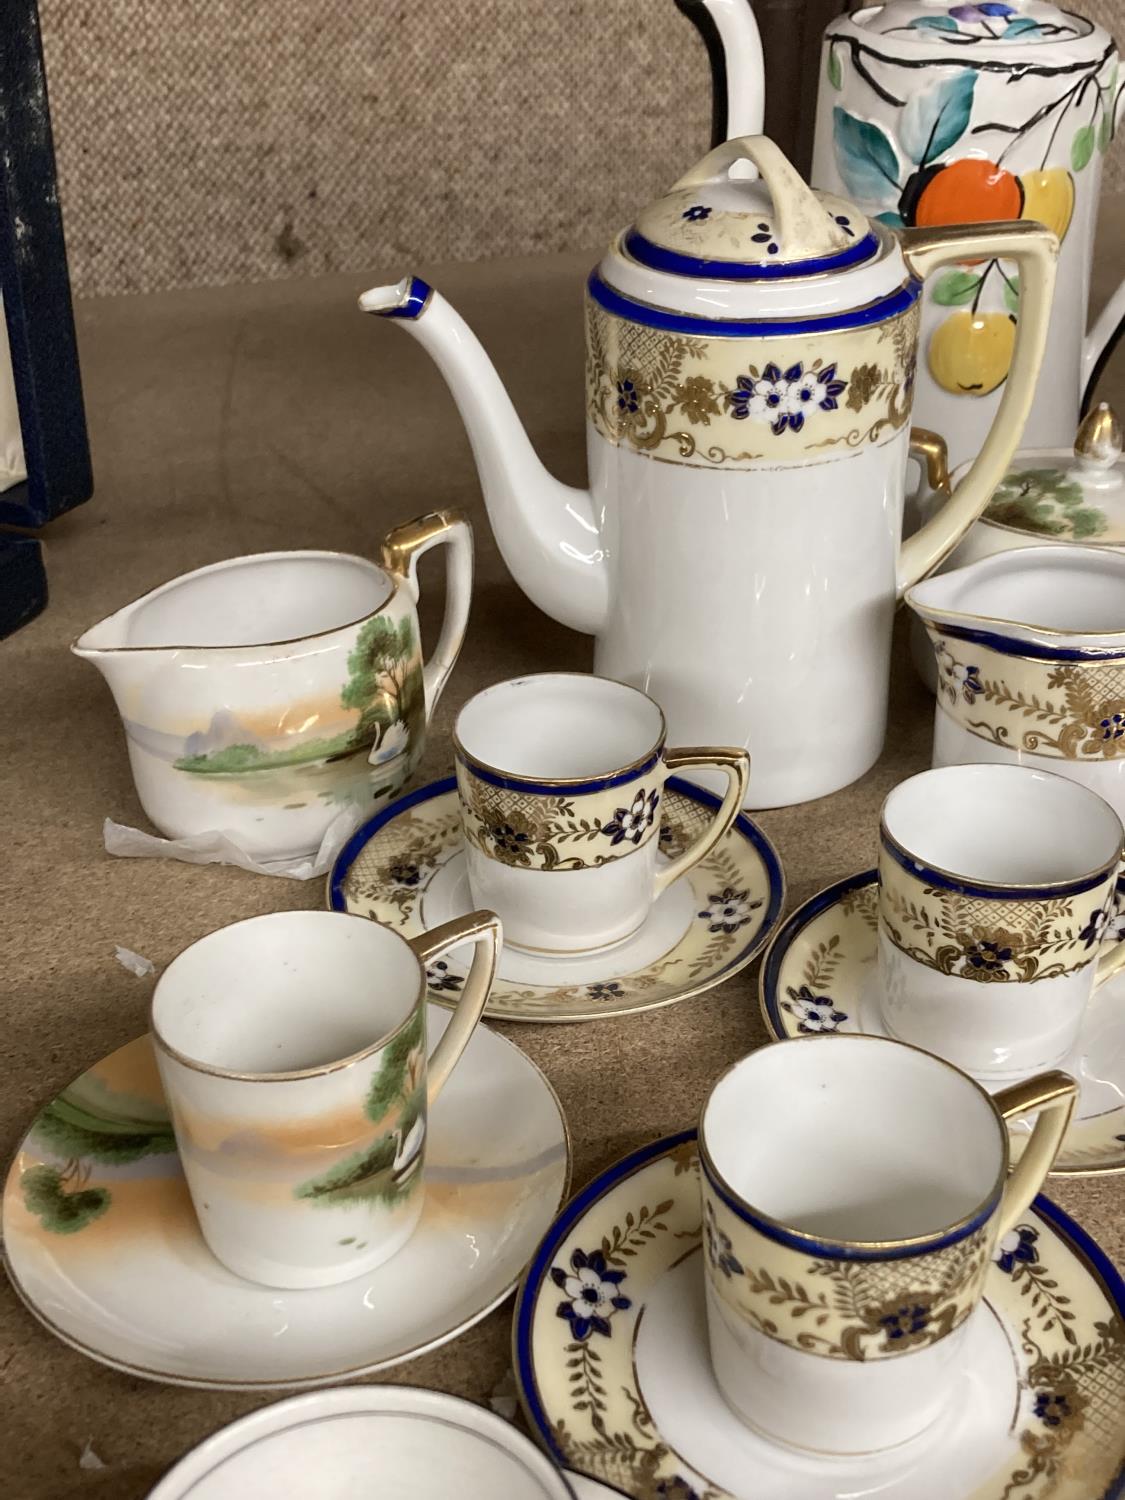 A QUANTITY OF TEAWARE TO INCLUDE A NORITAKE PART TEASET WITH COFFEE POT, CUPS, SAUCERS, CREAM JUG - Image 4 of 7